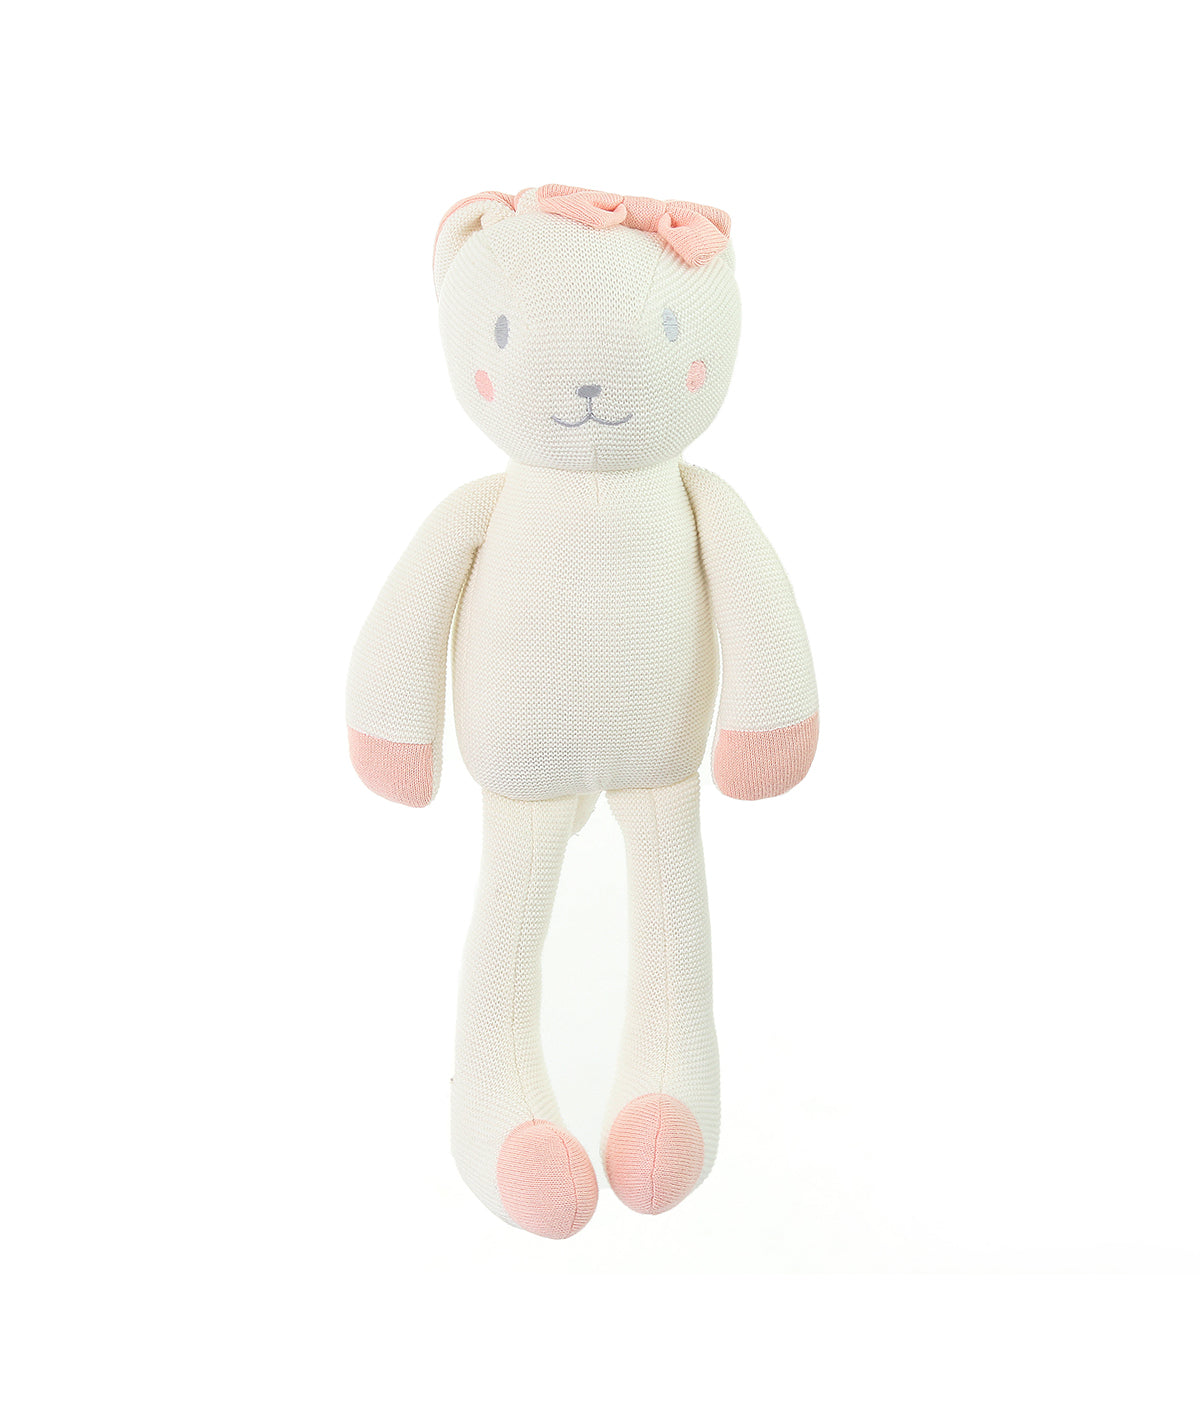 Berry Bunny Cotton Knitted Stuffed Soft Toy (Ivory & Baby Pink)